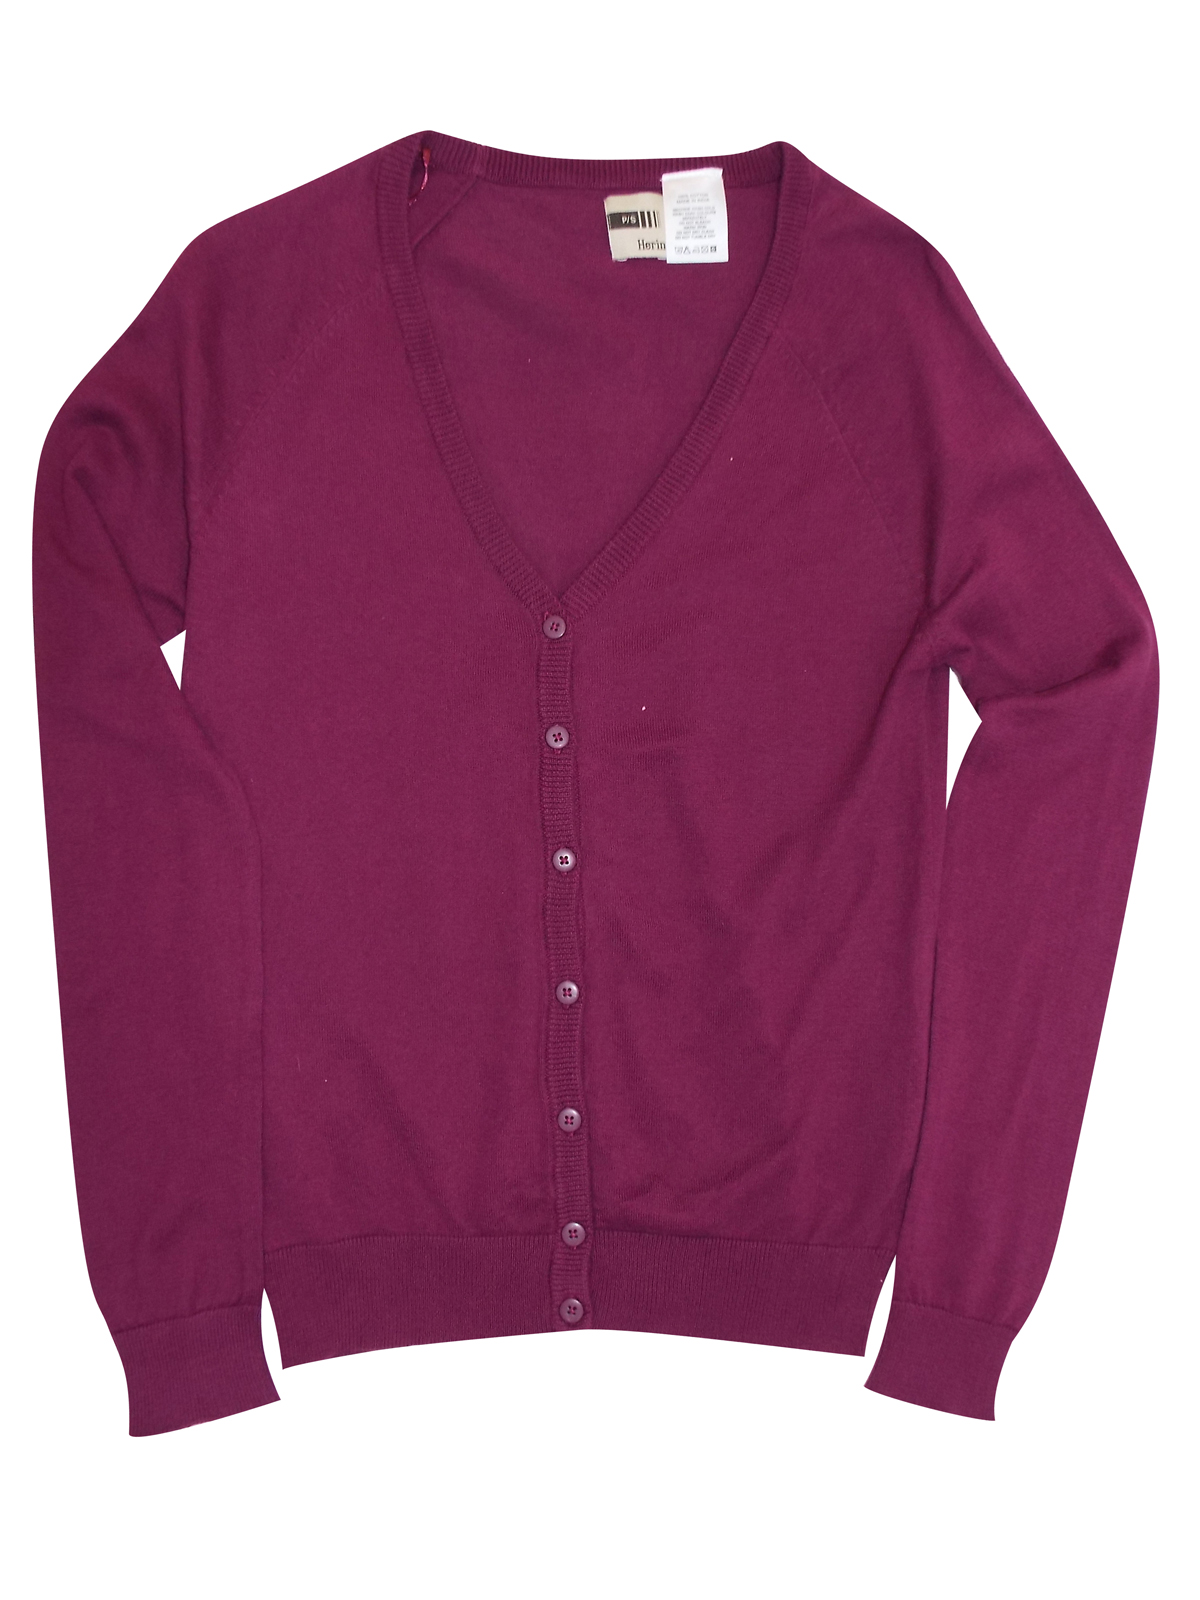 Hering - - Hering PURPLE Pure COTTON Fine Knit Summer Cardigan - Size ...